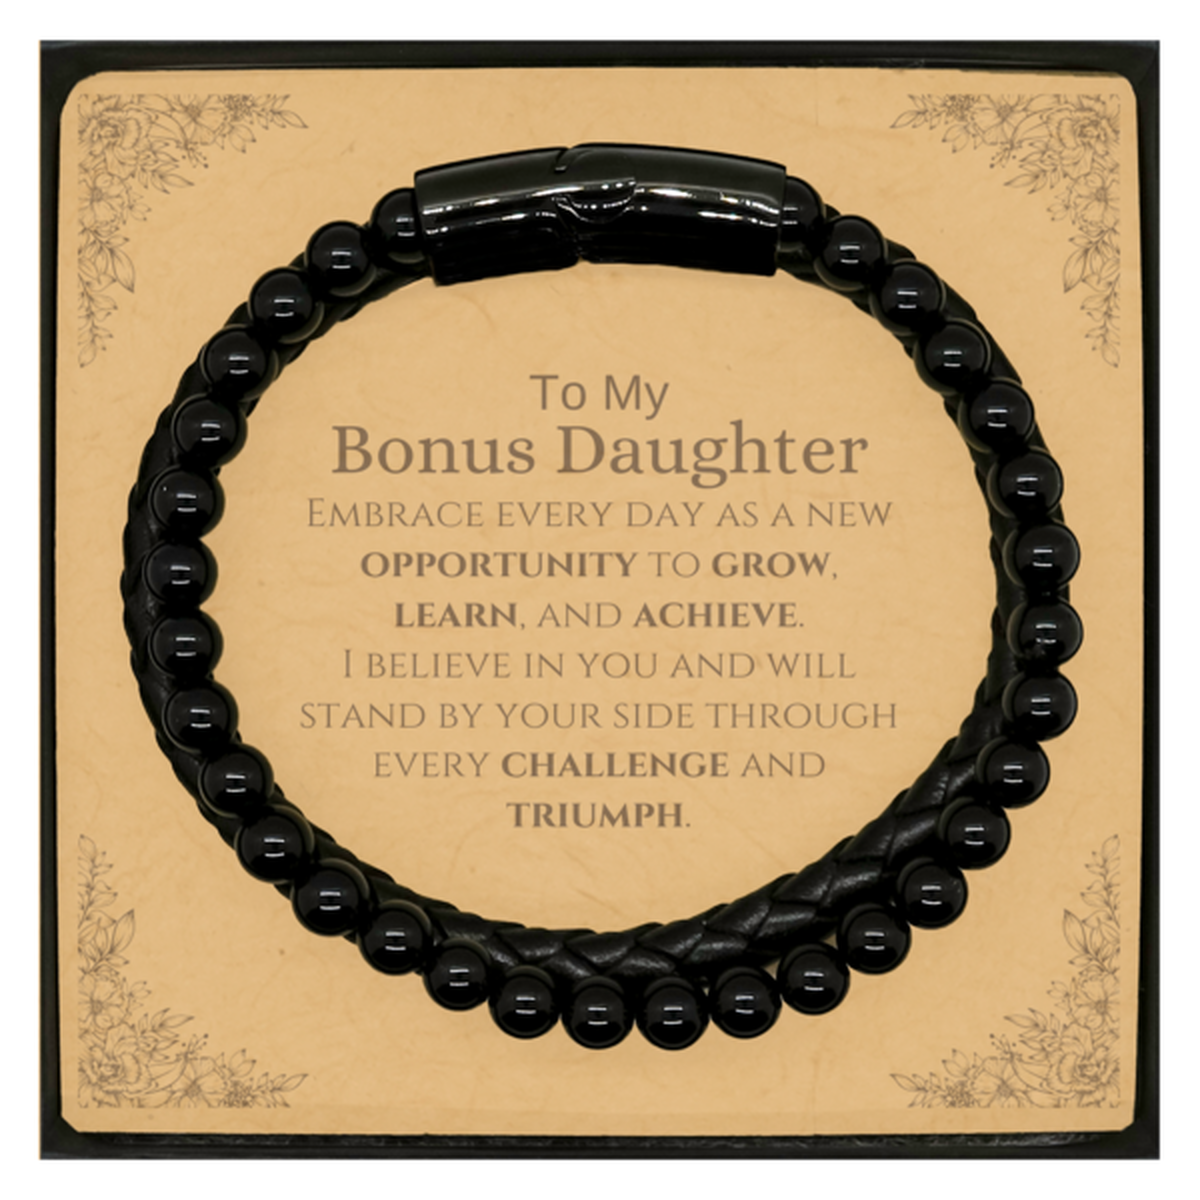 To My Bonus Daughter Gifts, I believe in you and will stand by your side, Inspirational Stone Leather Bracelets For Bonus Daughter, Birthday Christmas Motivational Bonus Daughter Gifts